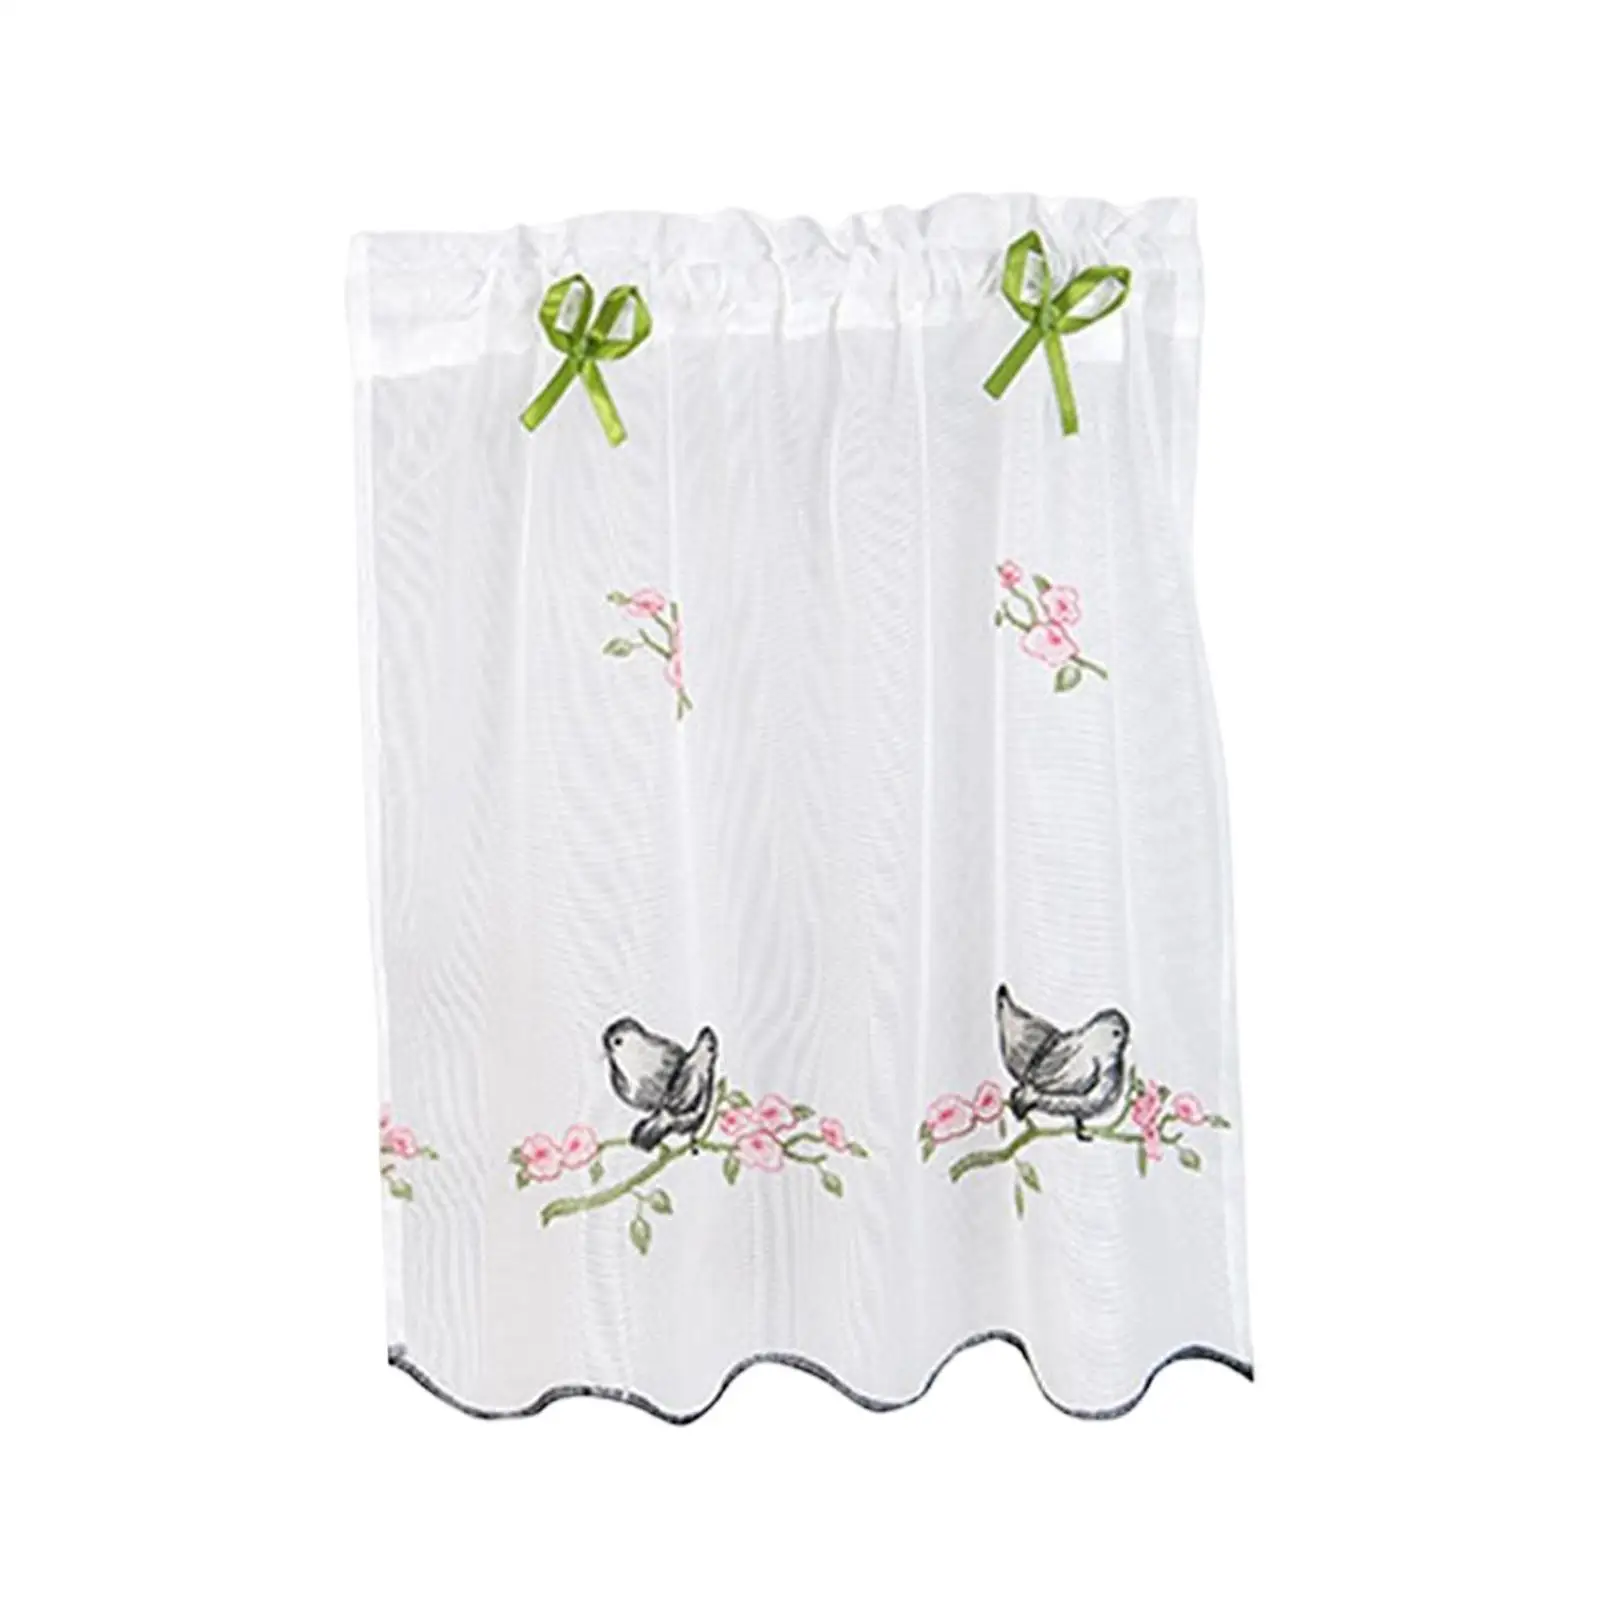 Rod Pocket Voile Curtain Drapes Decoration Semi Comfortable Soft Tier Curtain for Office Room Hotel Small Door